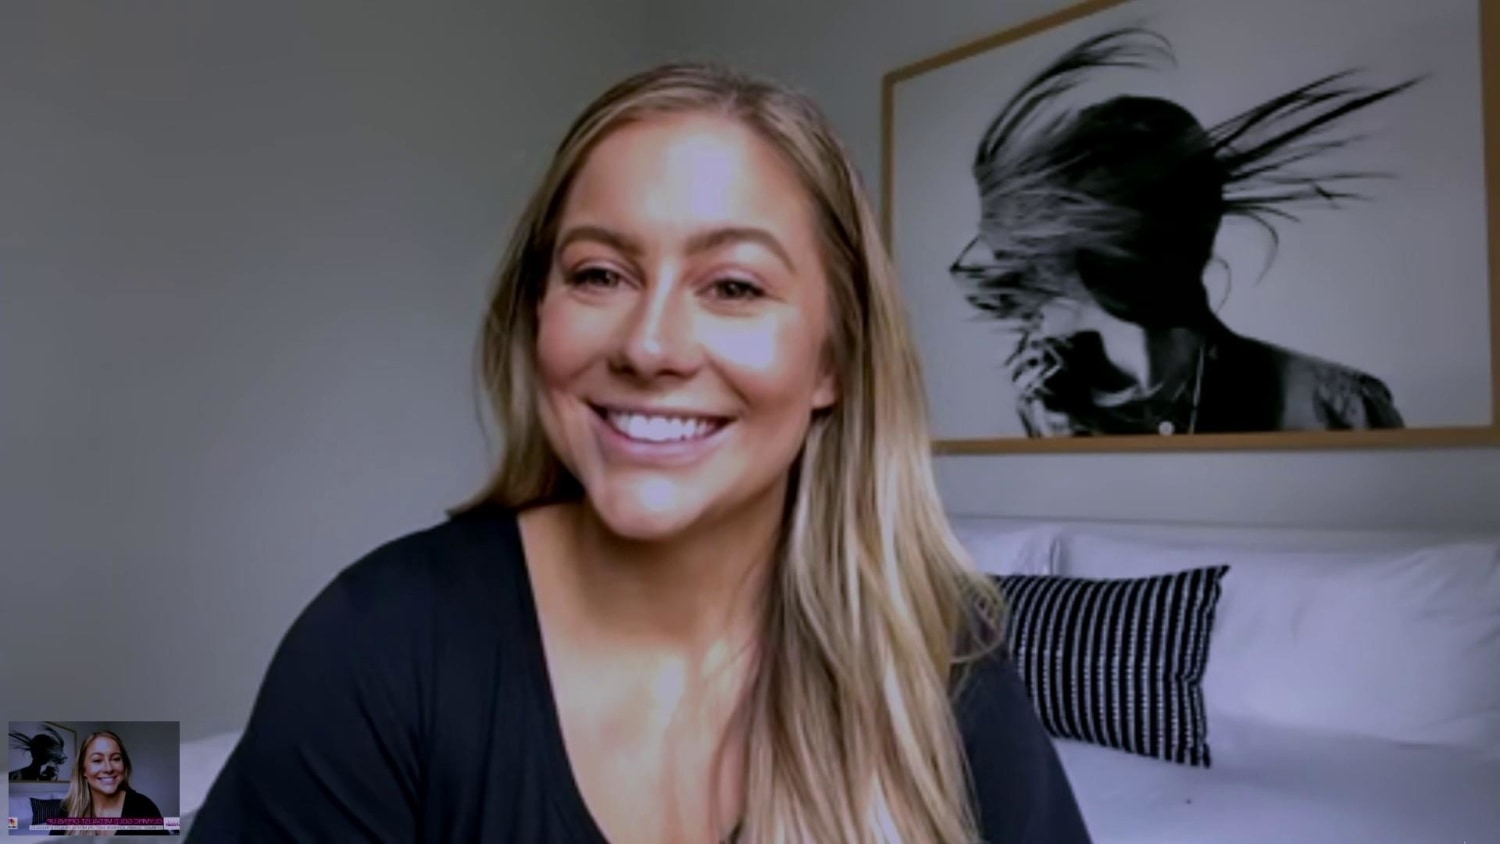 Shawn Johnson East Details Exclusive Pumping Routine in Instagram